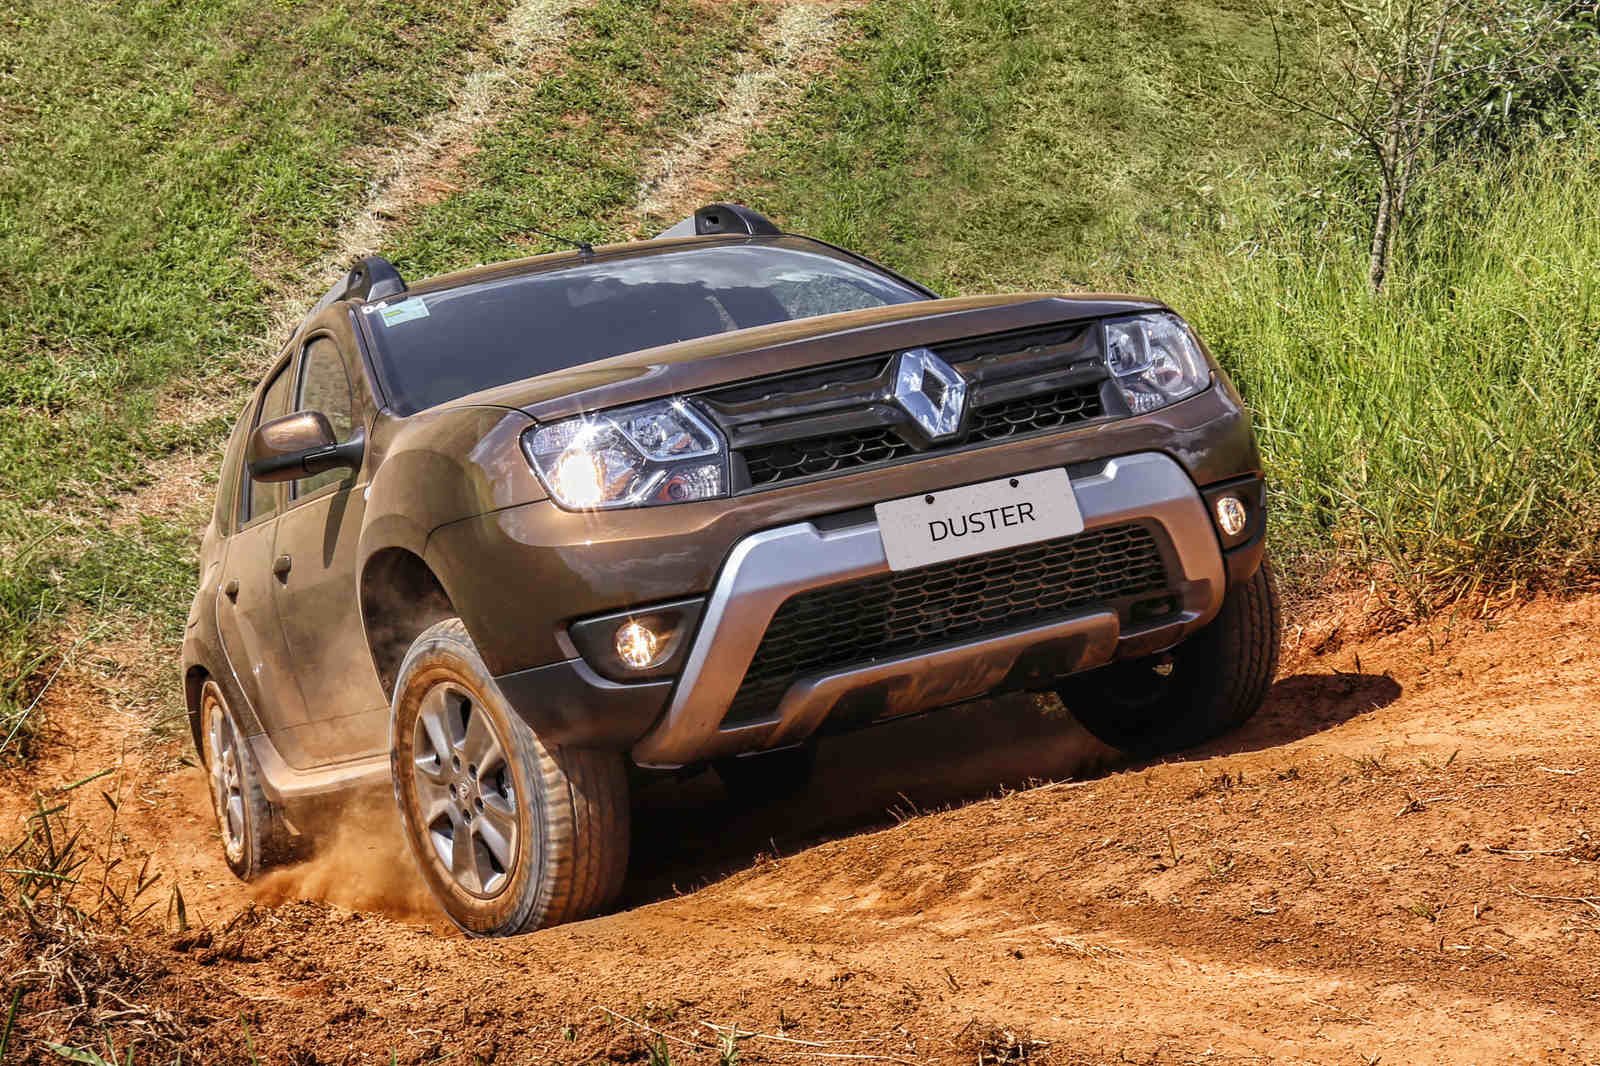 Дастер 4wd 2.0. Renault Duster 2015. Renault Duster 4wd. Renault Duster 2. Рено Дастер 2015.